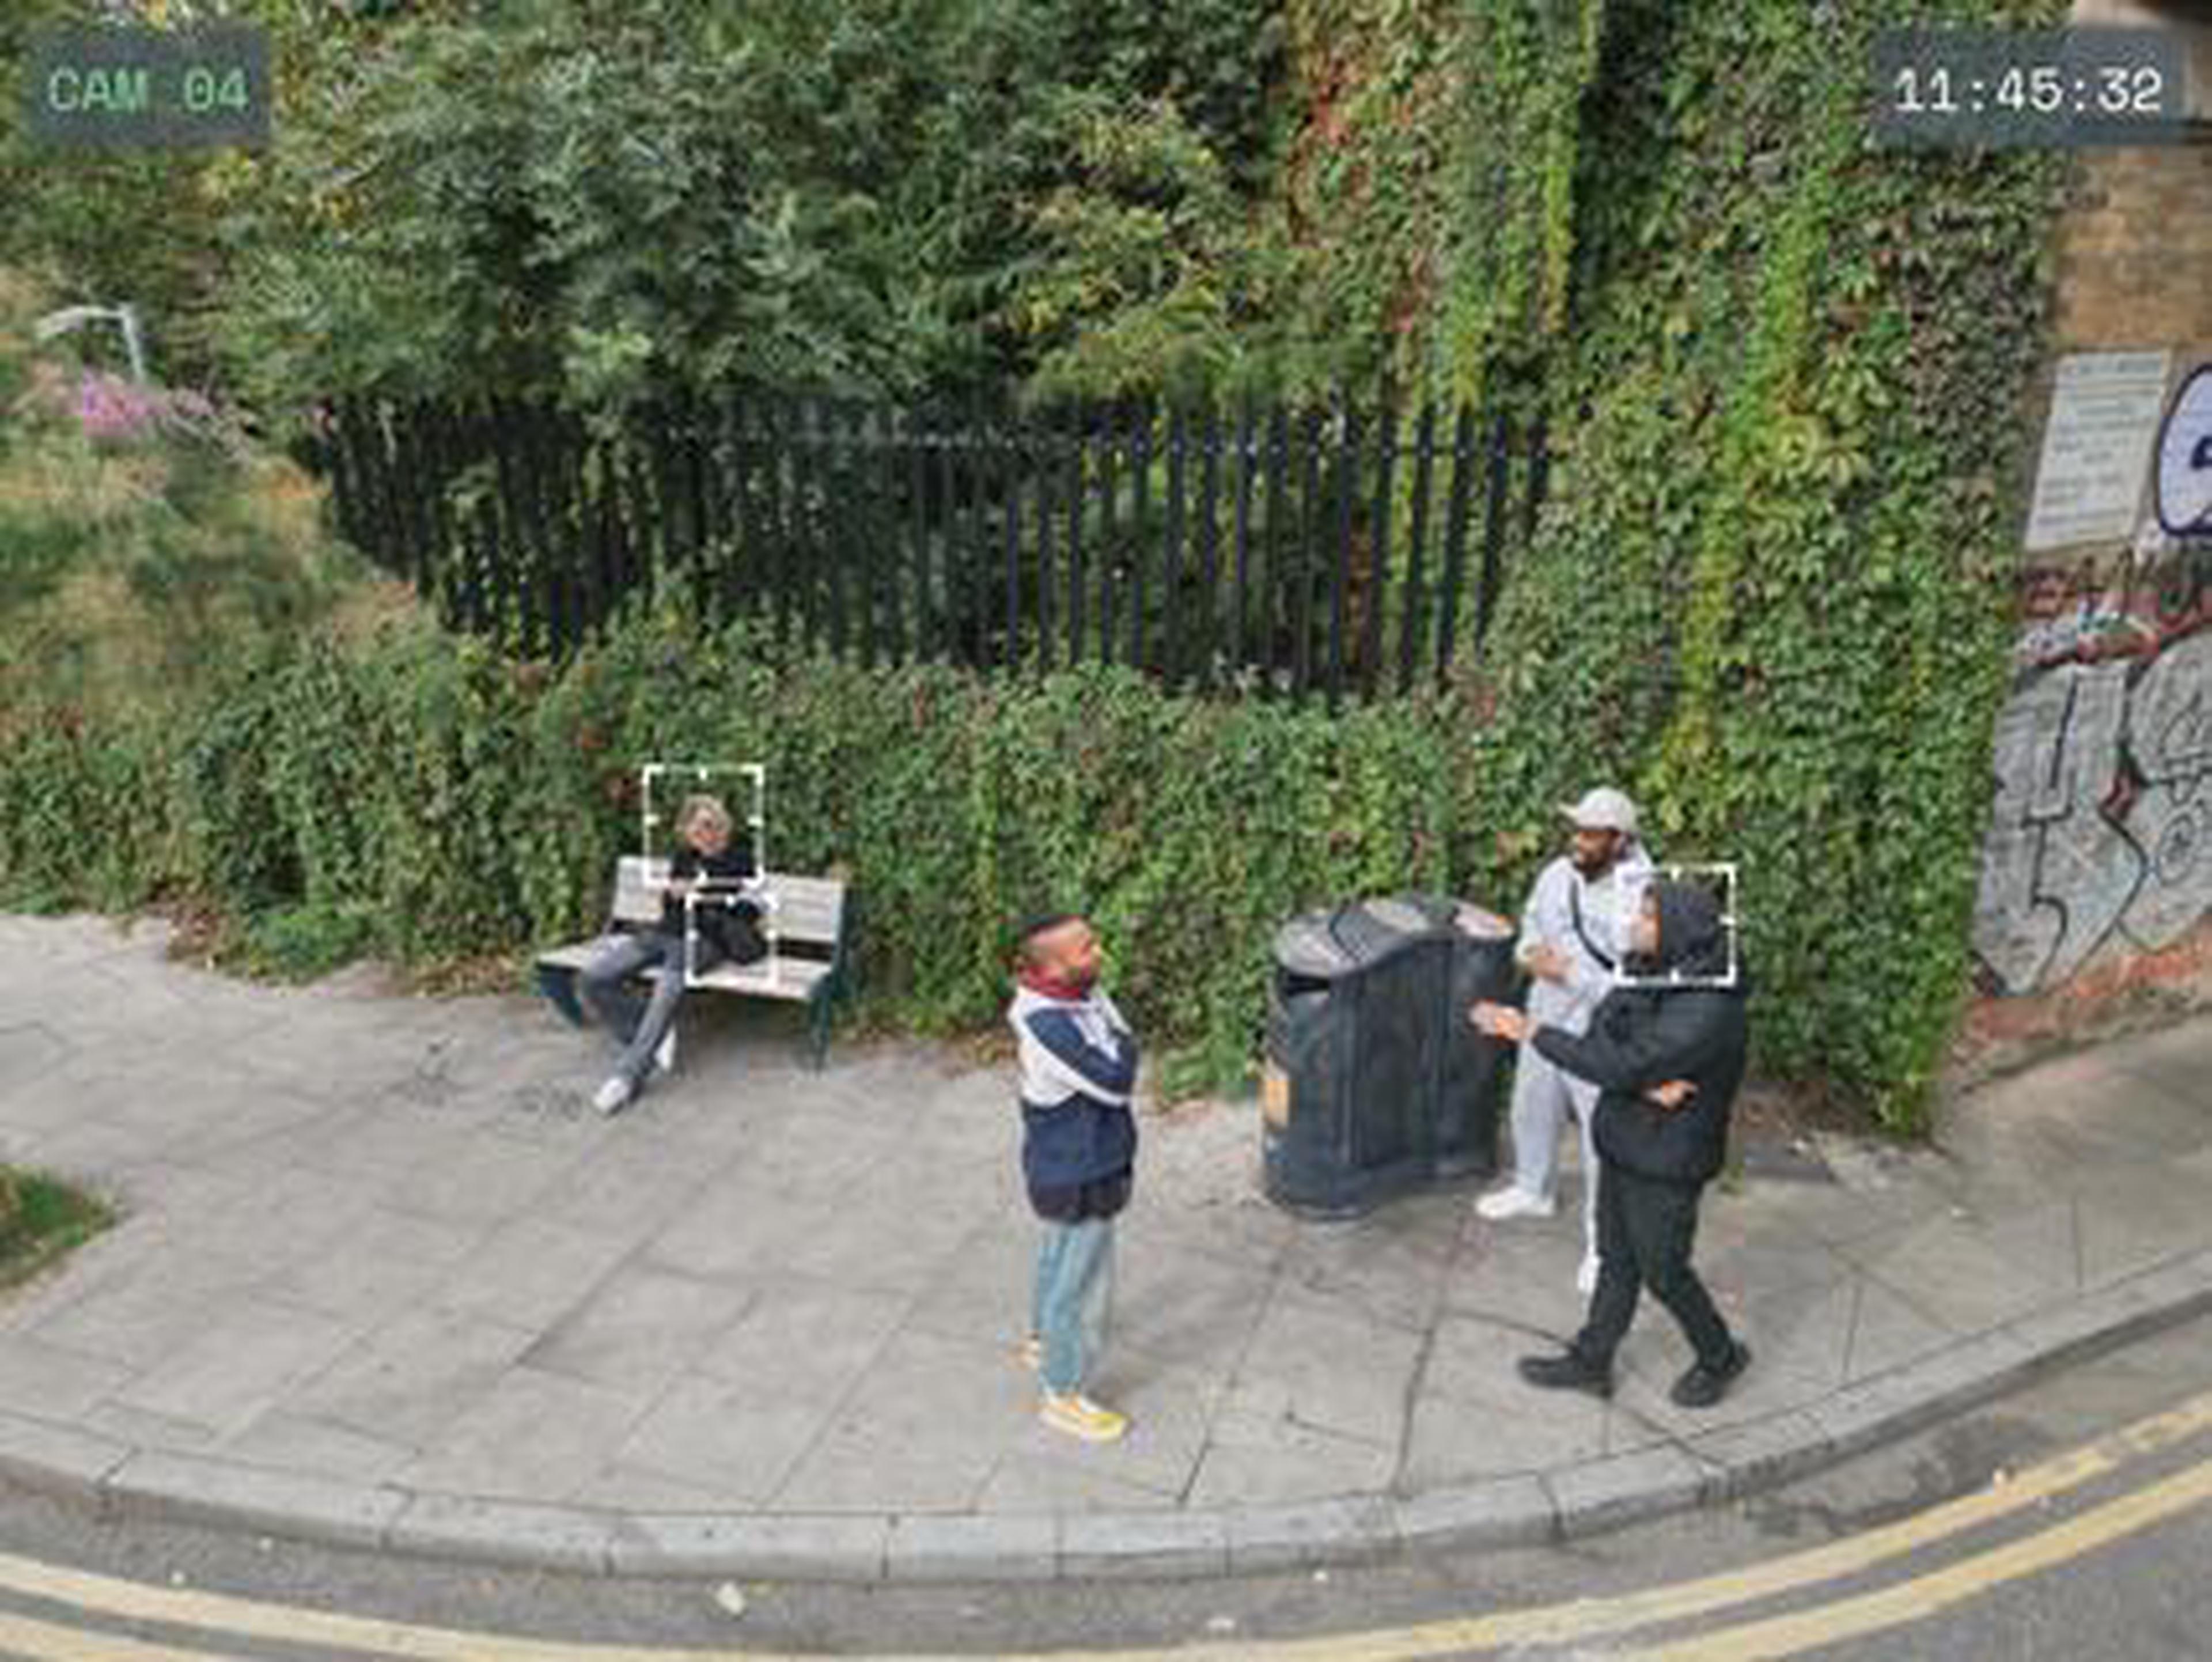 Landscape shaped image. Four people are outside on a pavement in front of some railings and lush green foliage. Two of them have a white frame superimposed round their heads, showing them being surveilled, perhaps from a drone. 